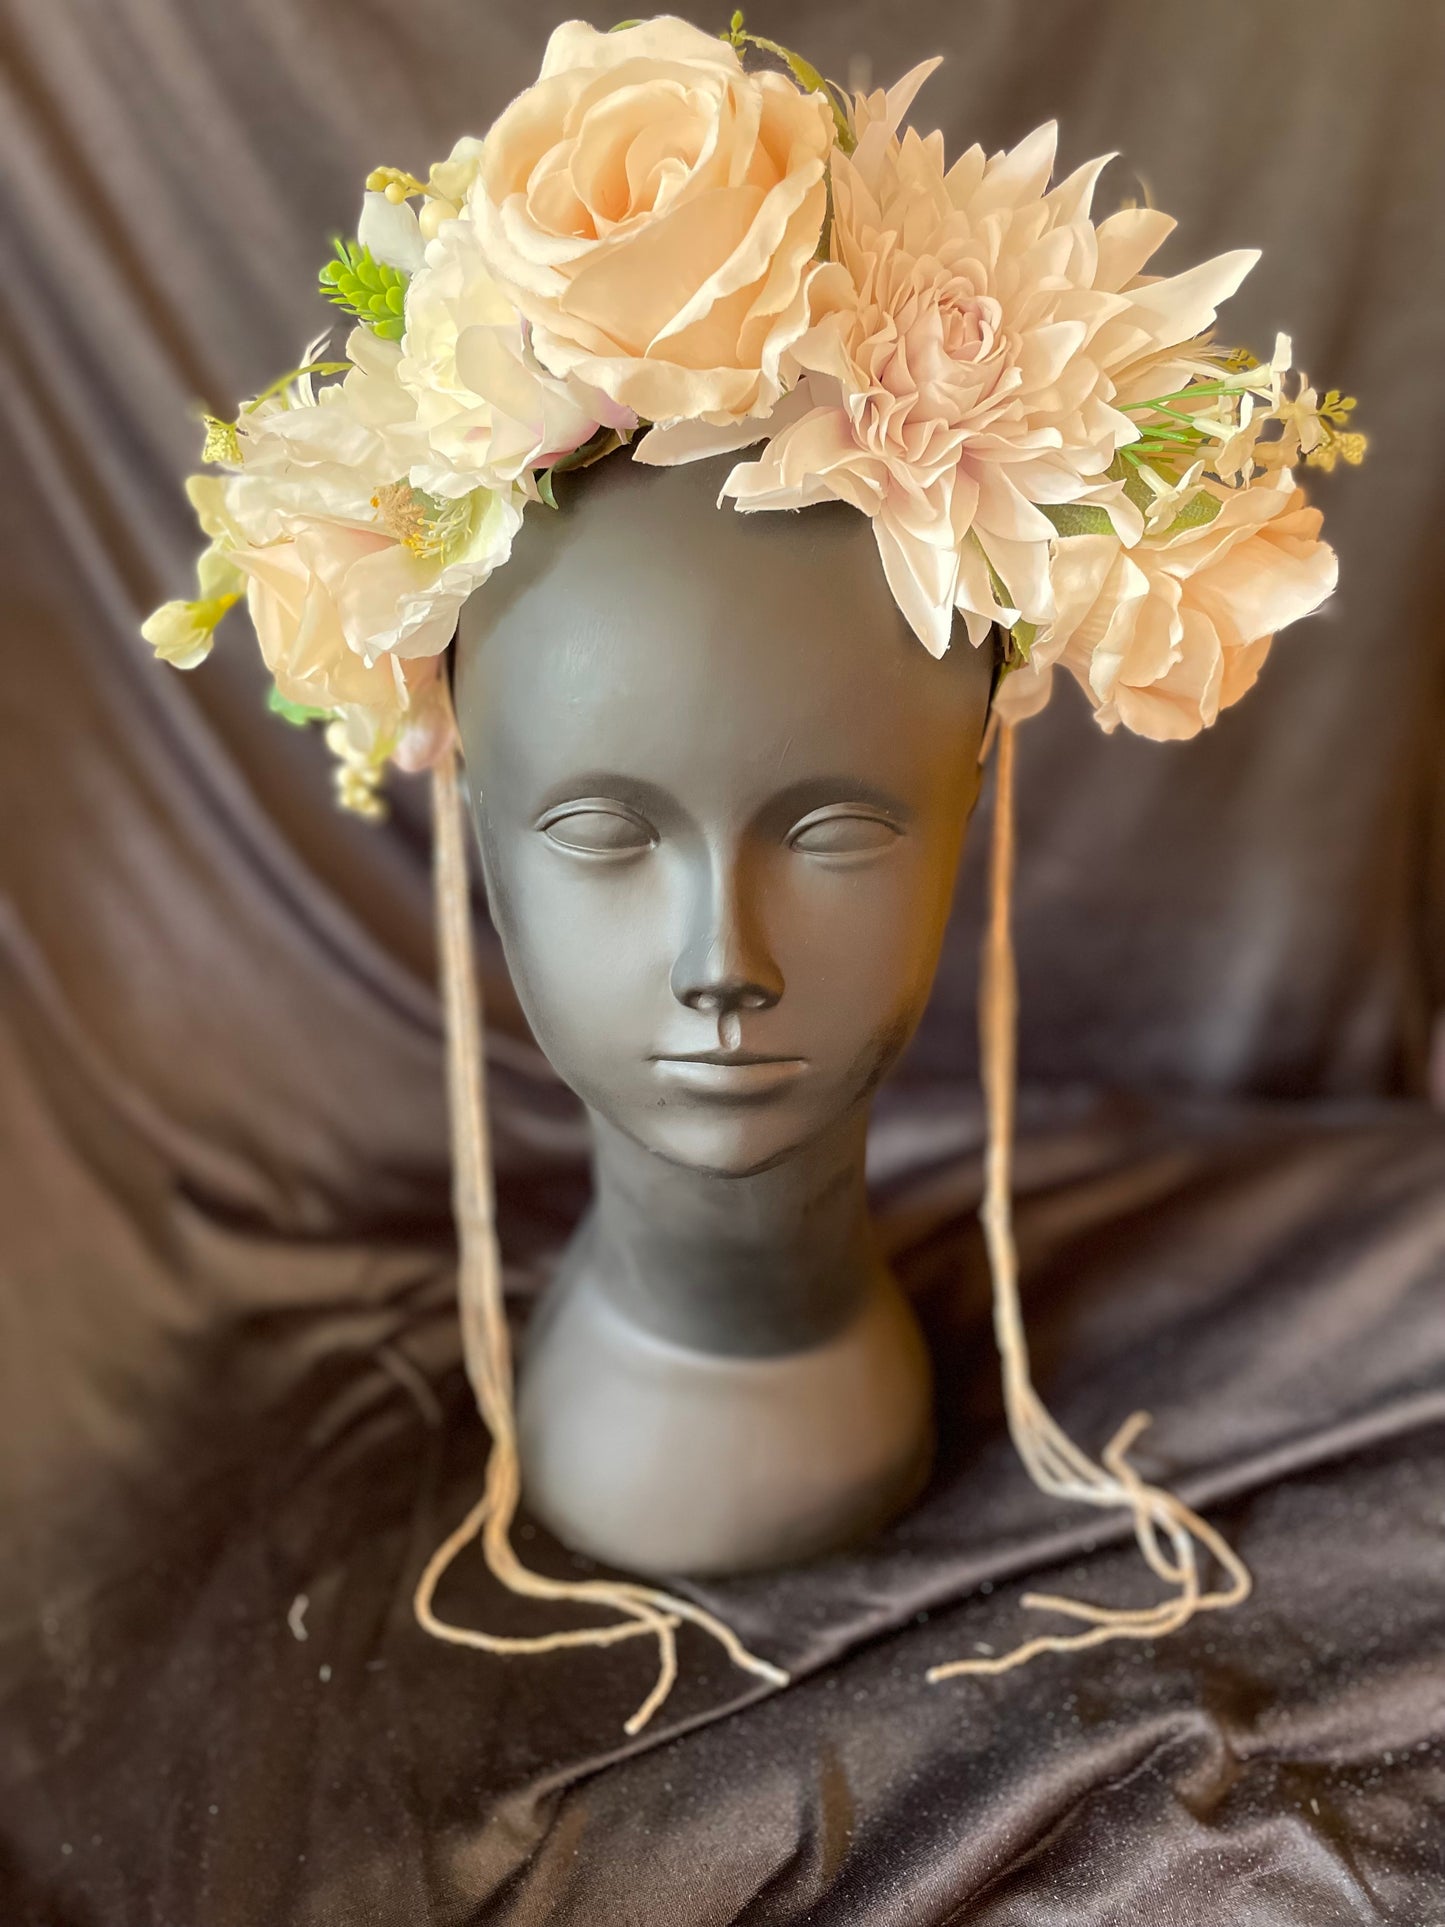 Dance of the Druid Floral Crown